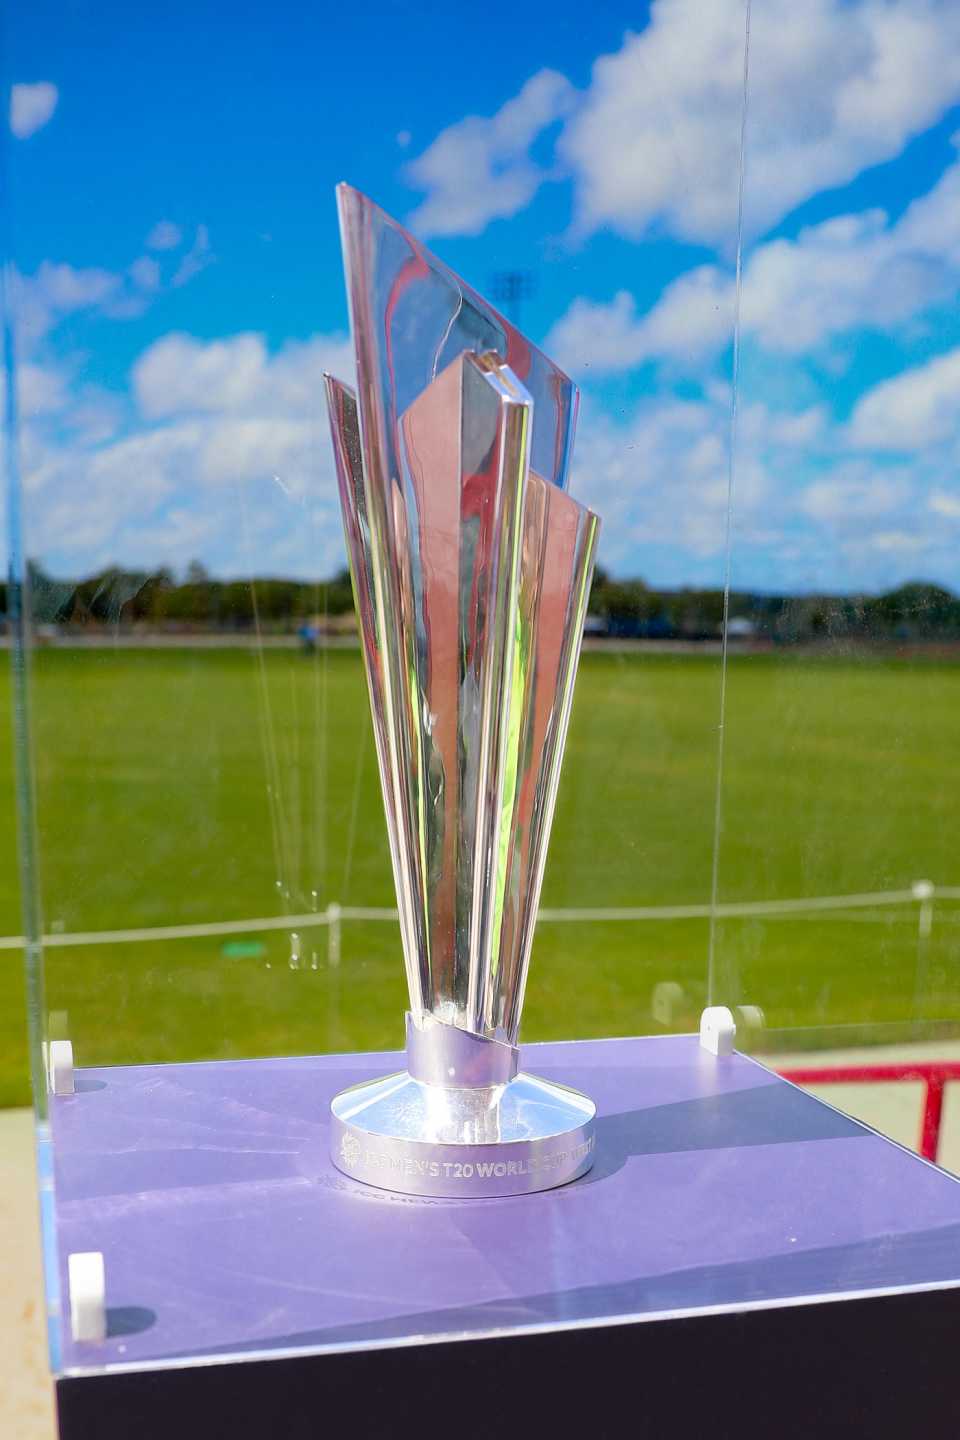 The Men's T20 World Cup trophy in display at the Central Broward Stadium